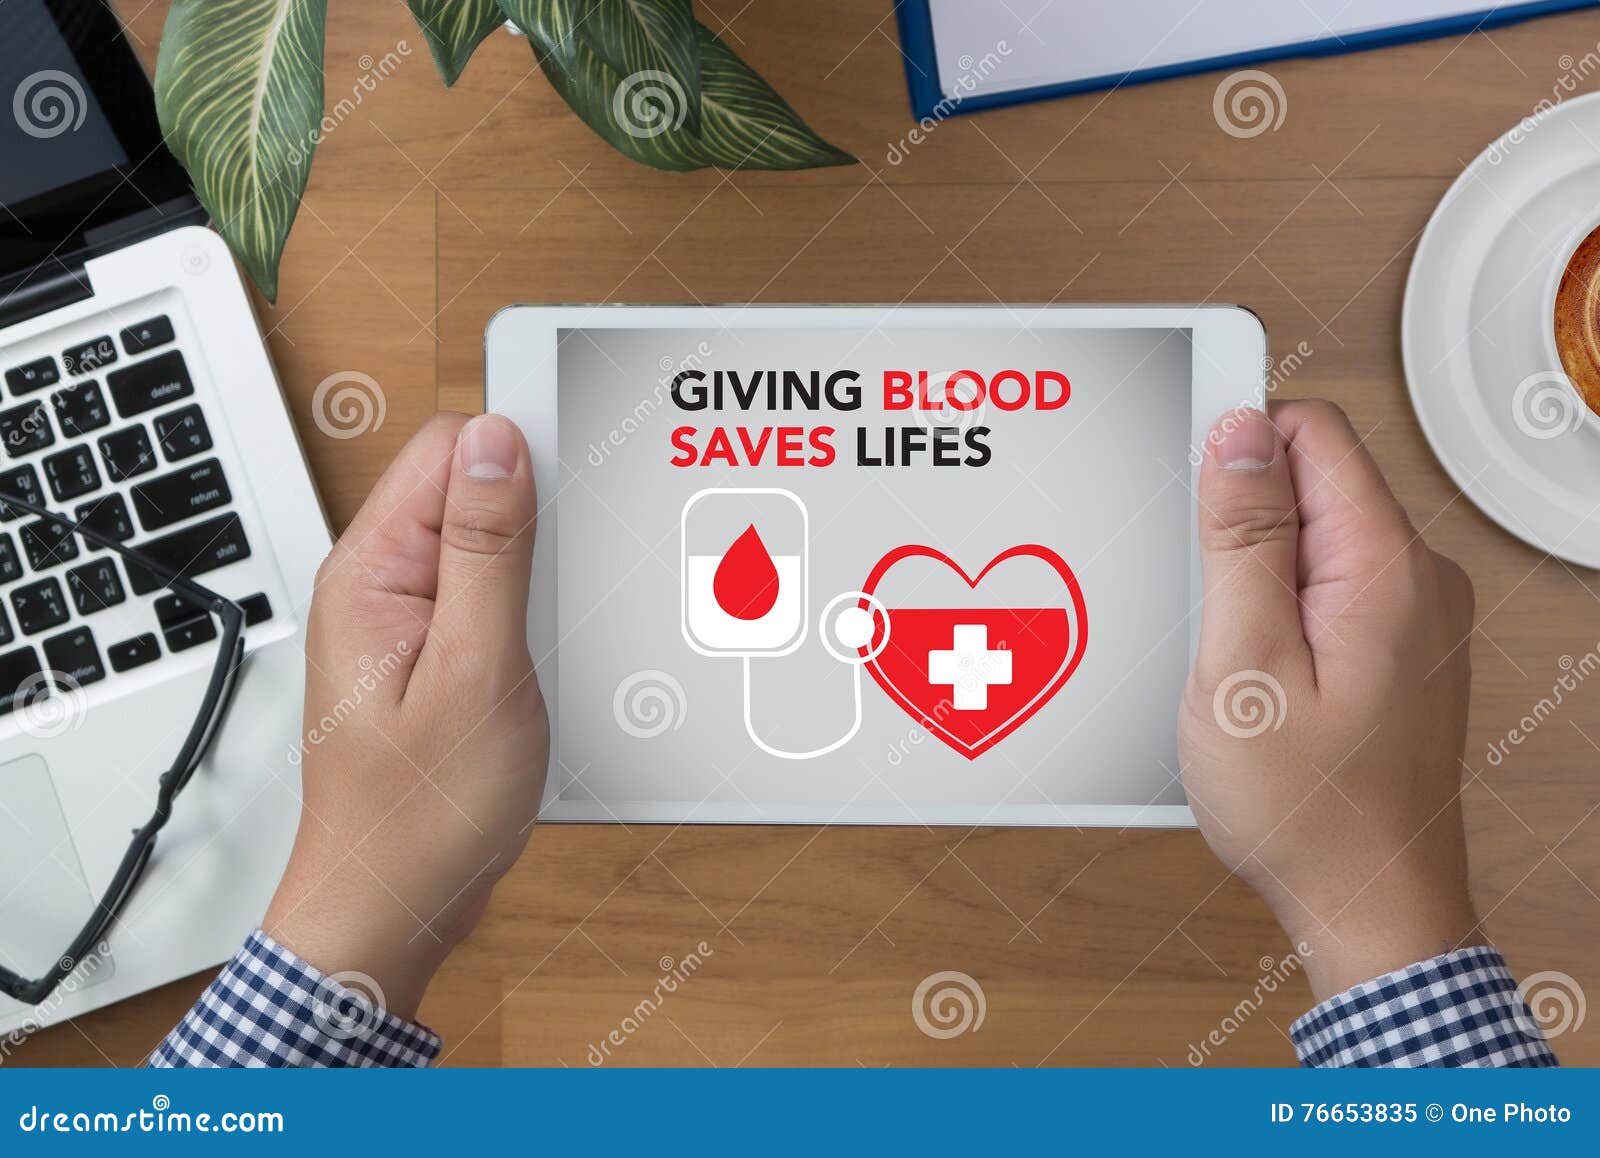 giving blood saves lifes blood donation give life